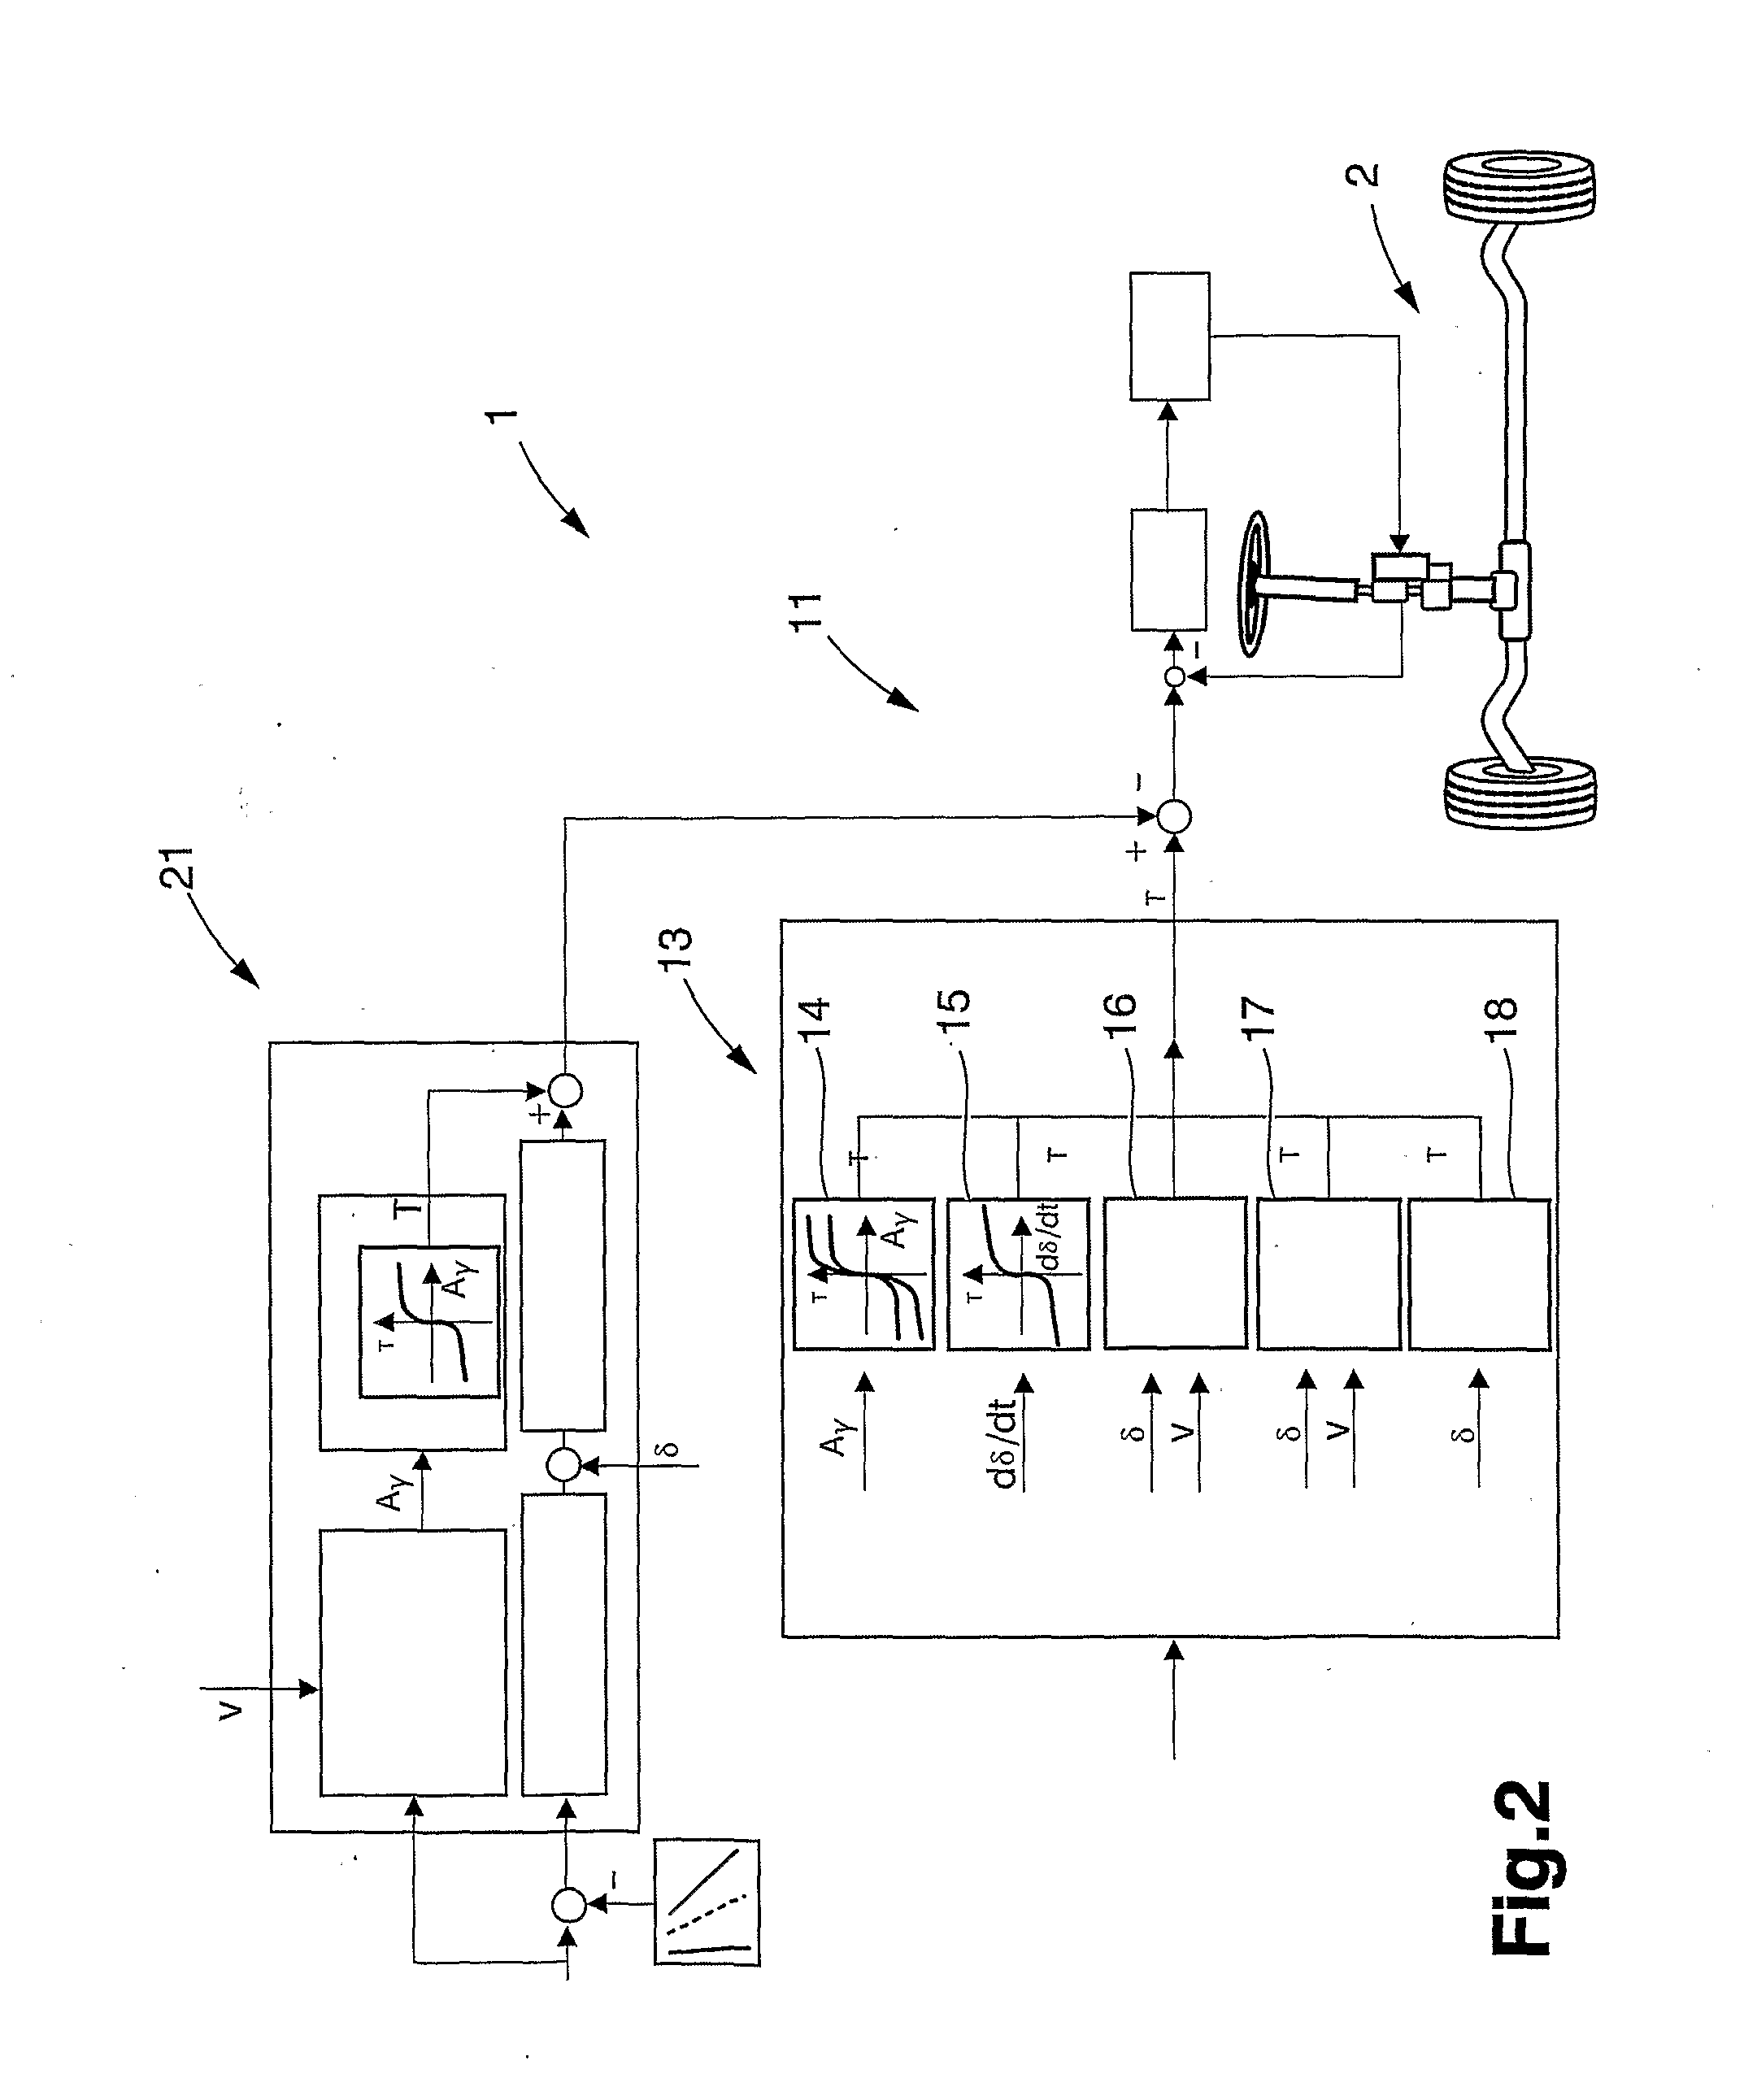 Method and a system for assisting a driver of a vehicle during operation